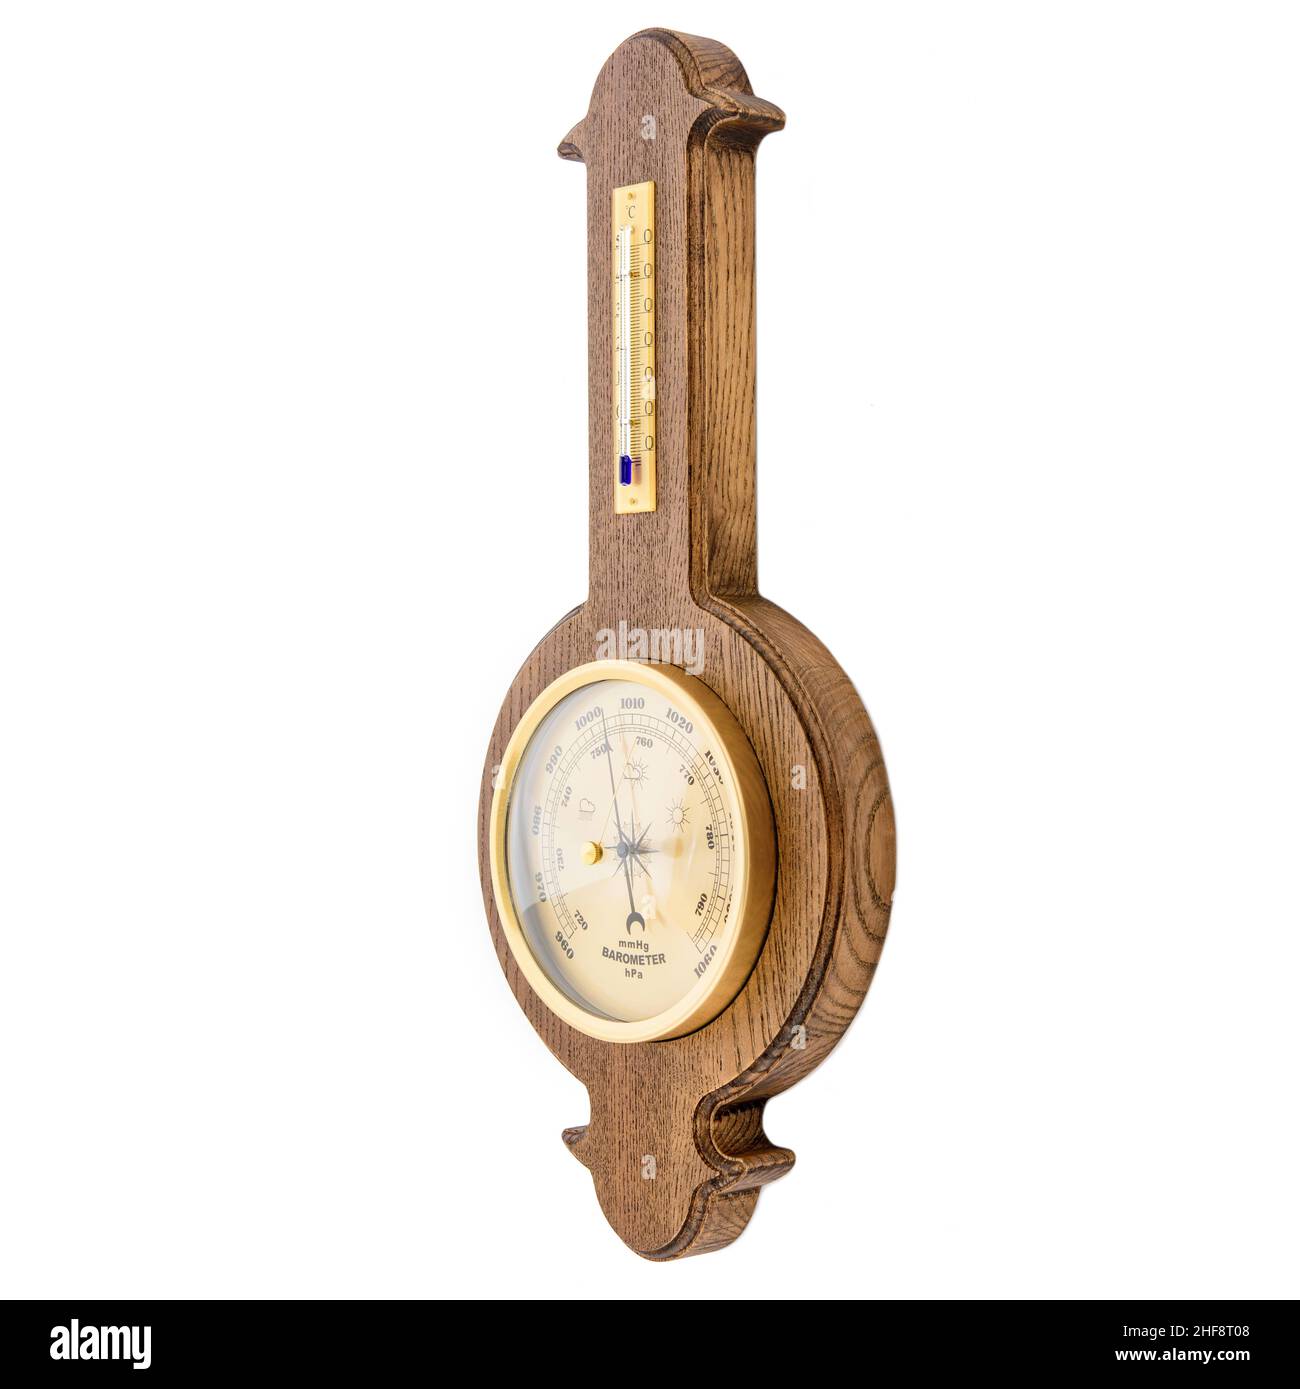 https://c8.alamy.com/comp/2HF8T08/vintage-wooden-clock-with-barometer-and-old-marine-style-thermometer-on-a-white-background-wall-decor-for-the-interior-2HF8T08.jpg